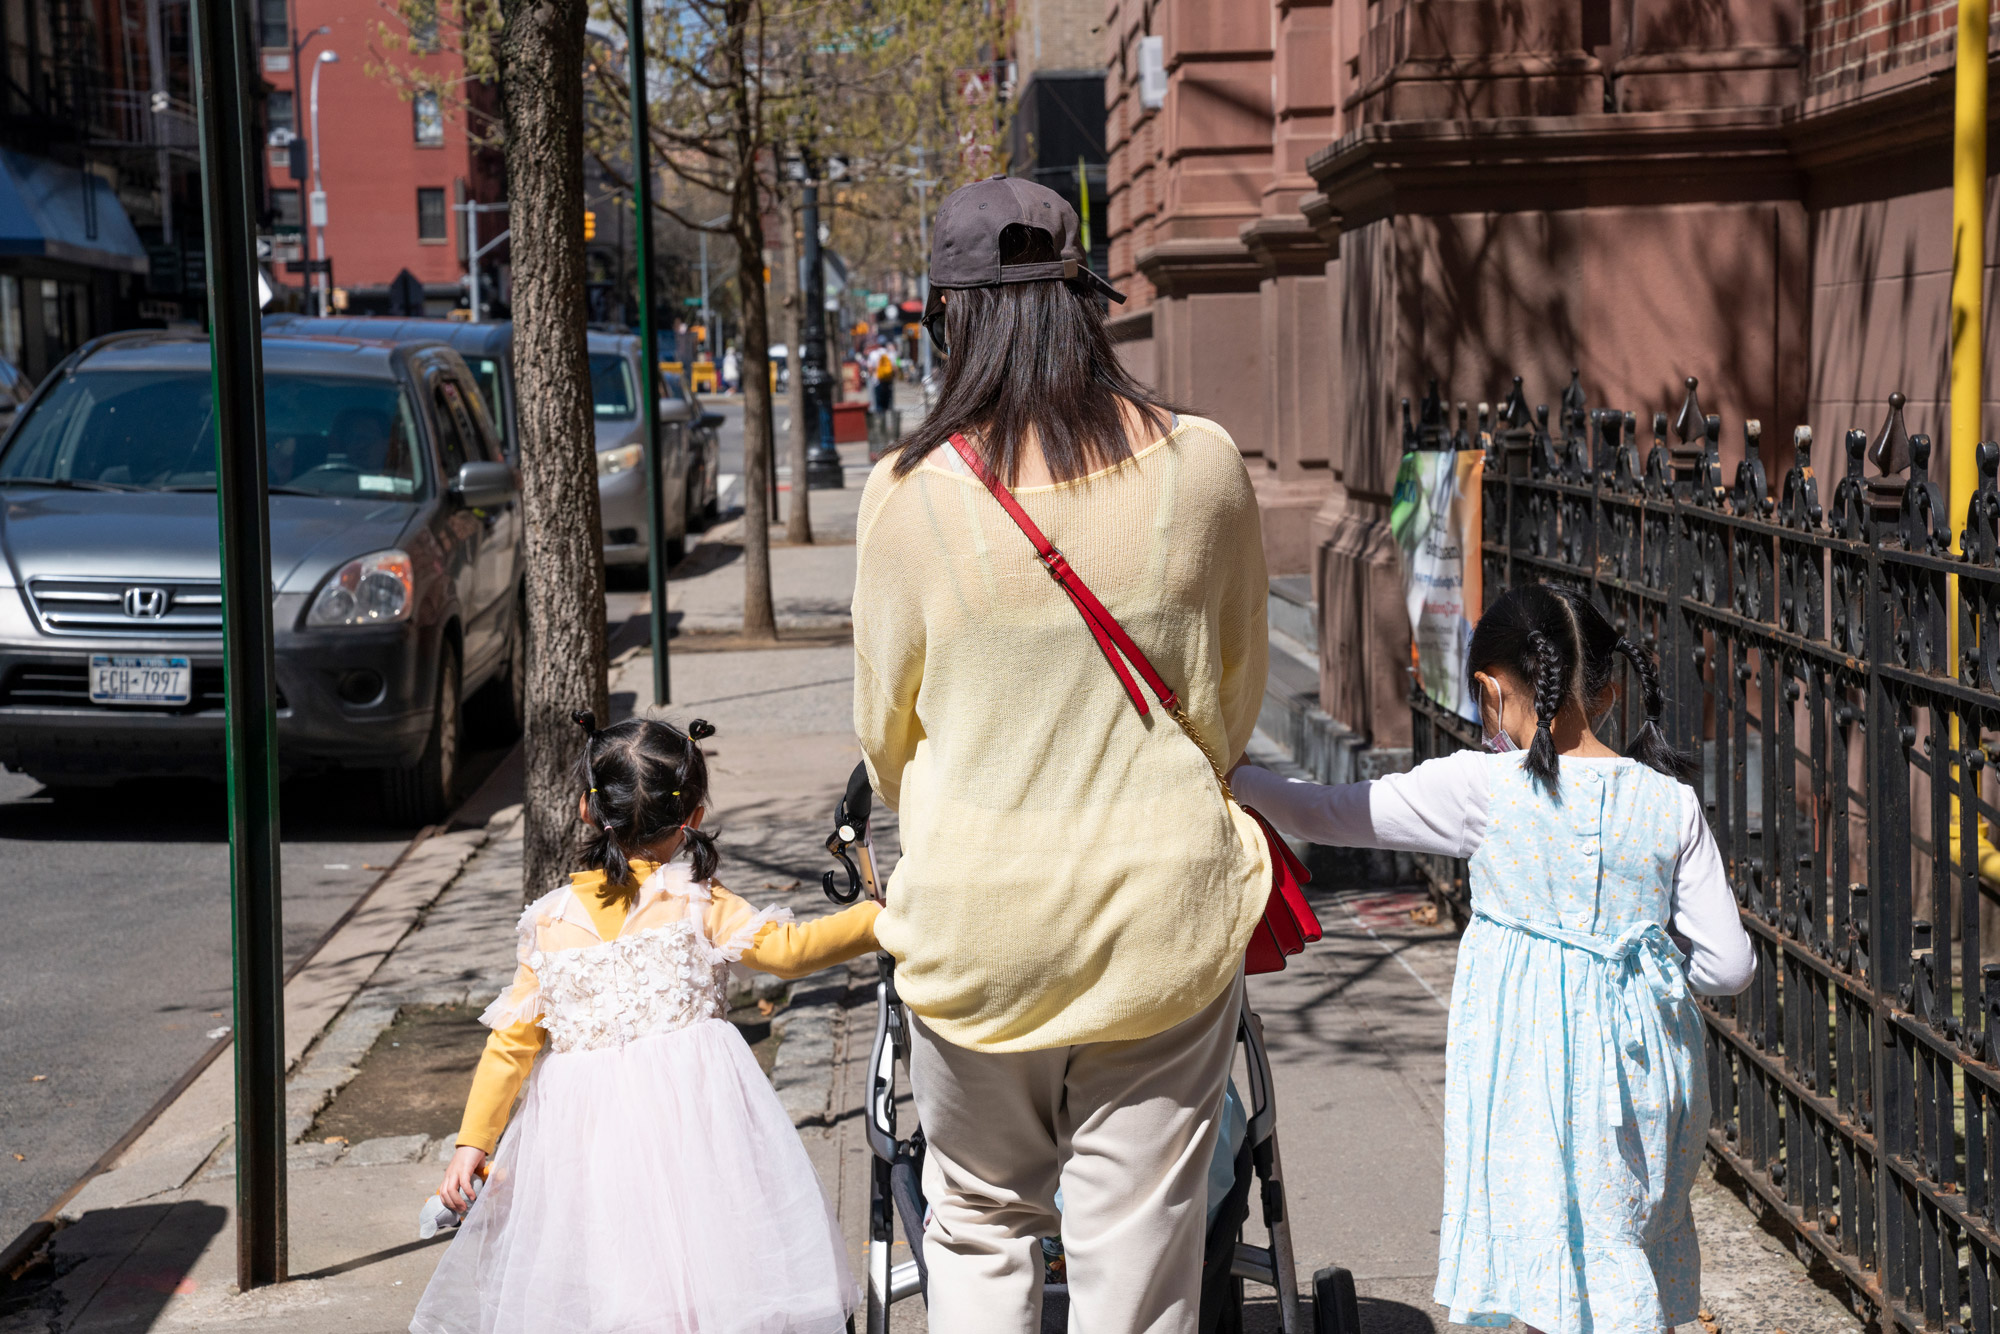 A mother and her two young daughters push a stroller down the sidewalk